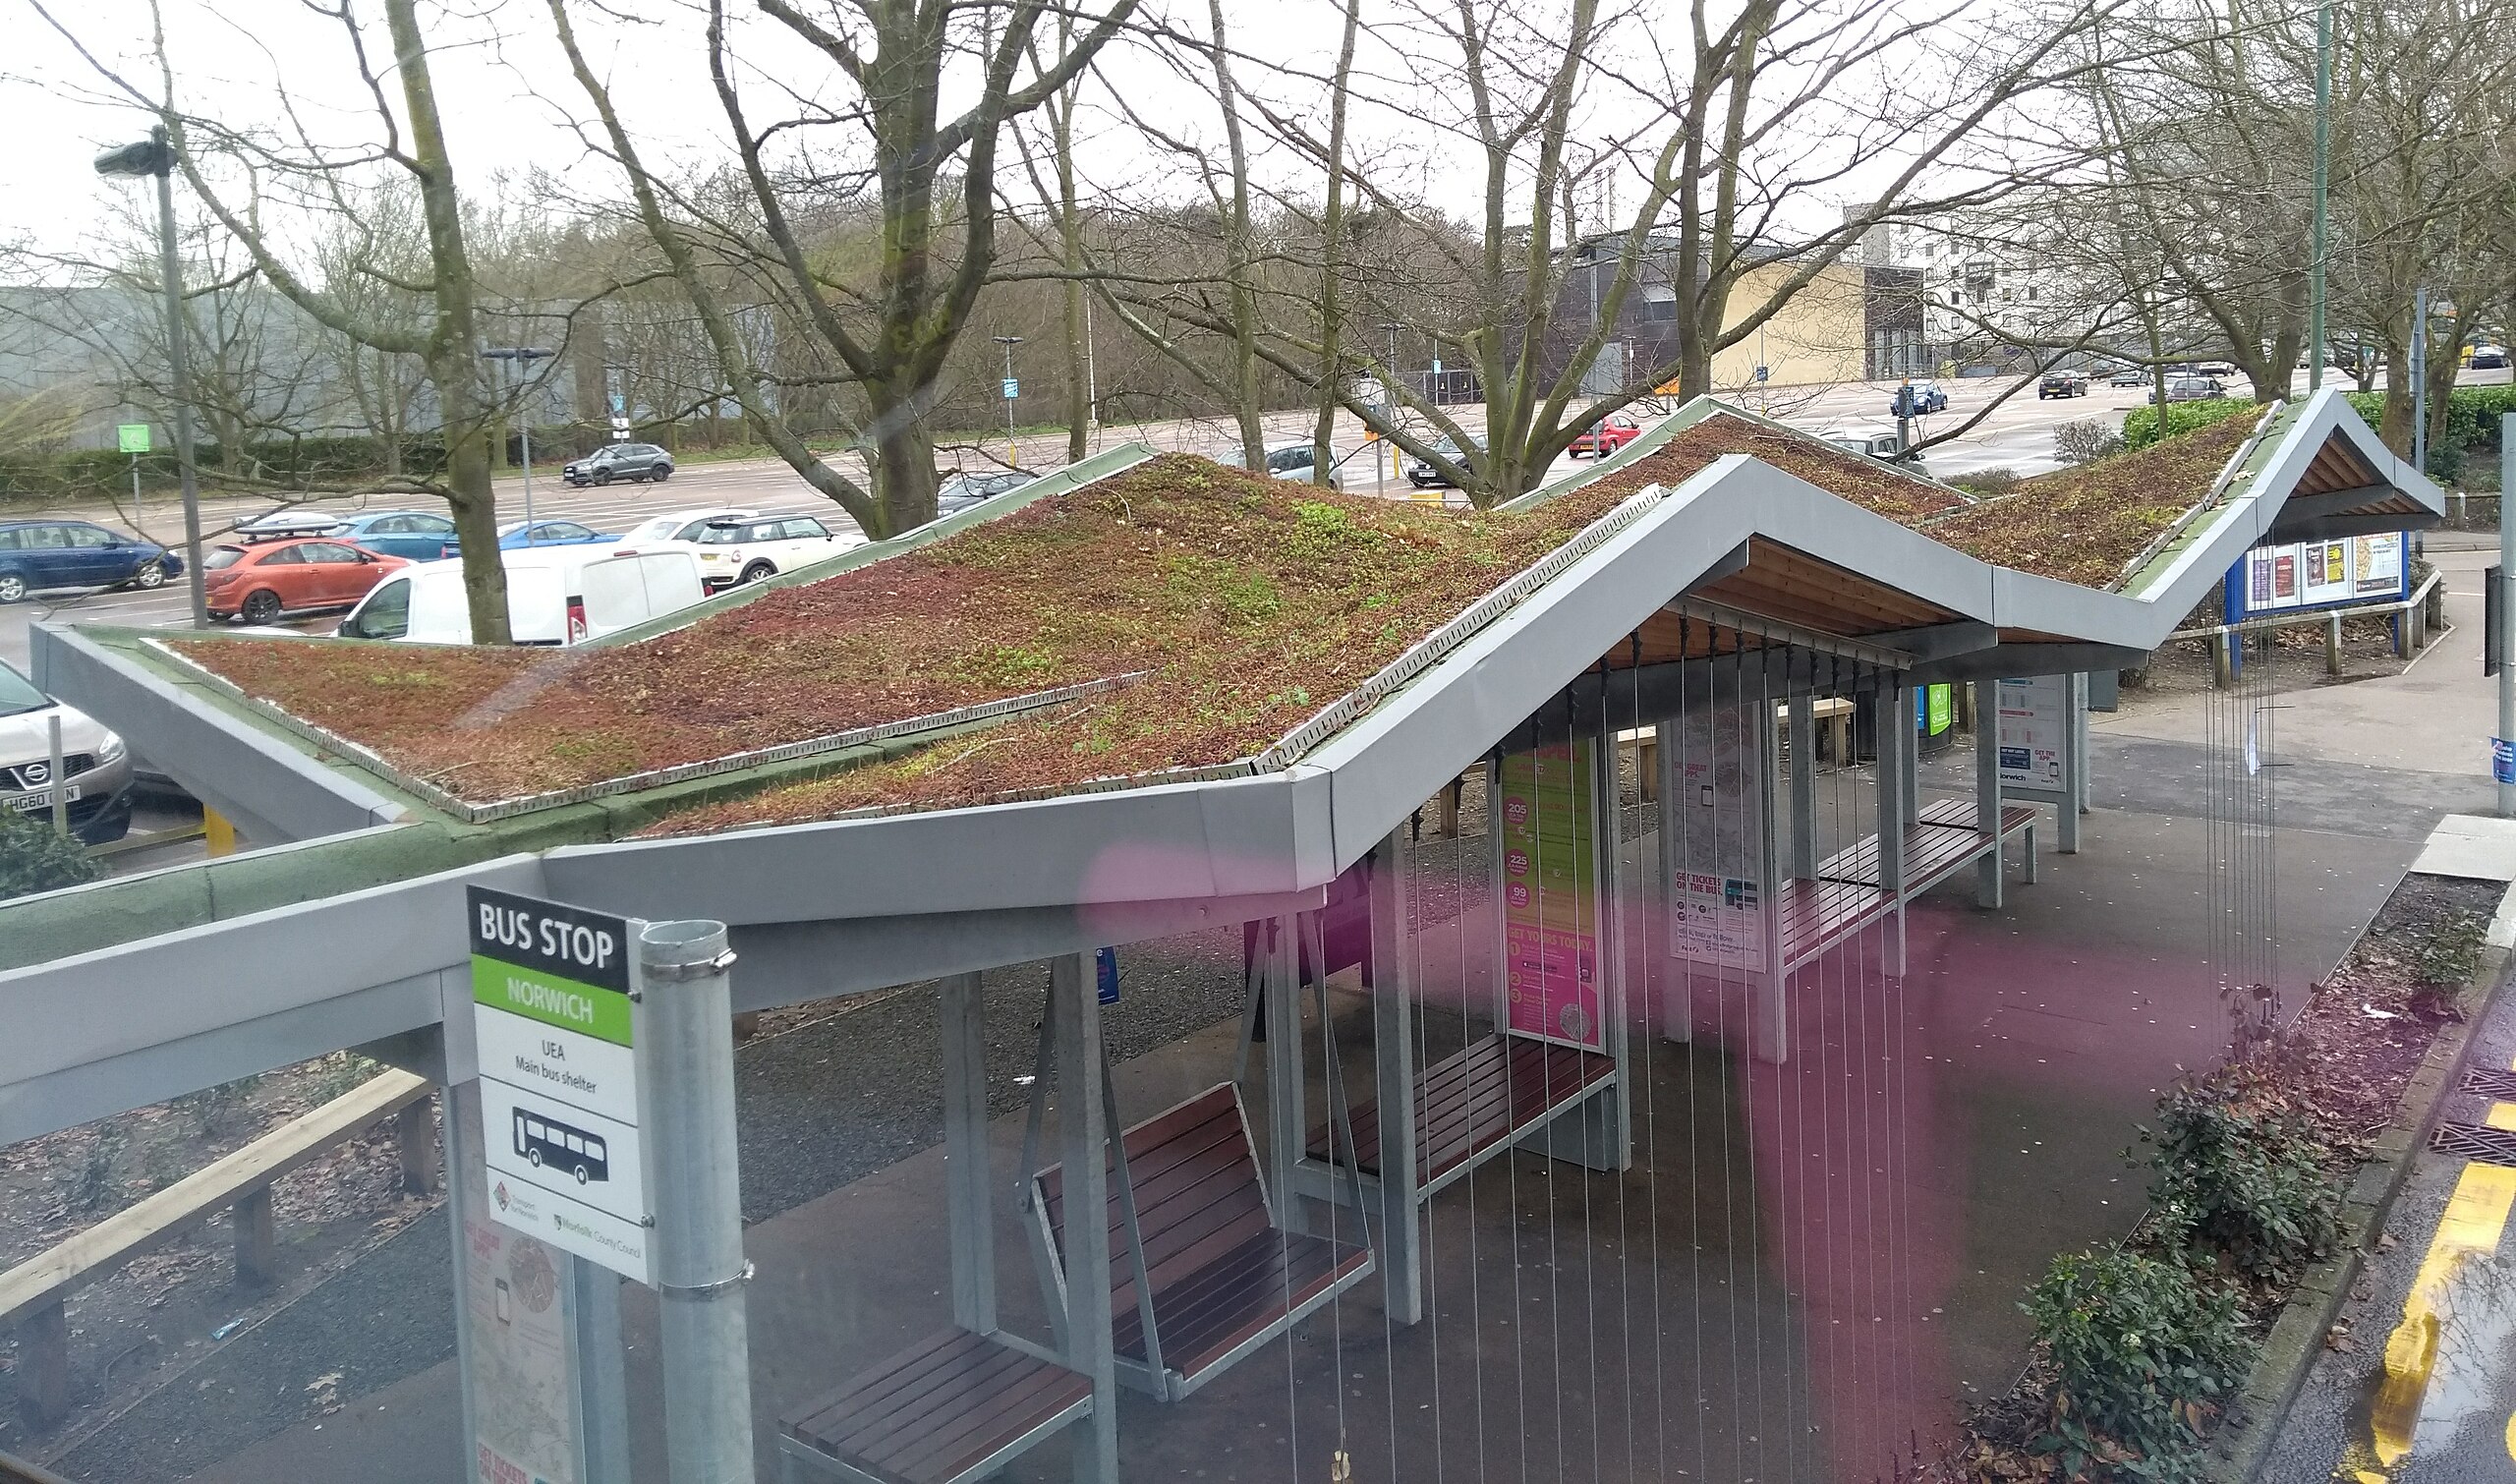 Green roof bus shelter installed at the University of East Anglia.